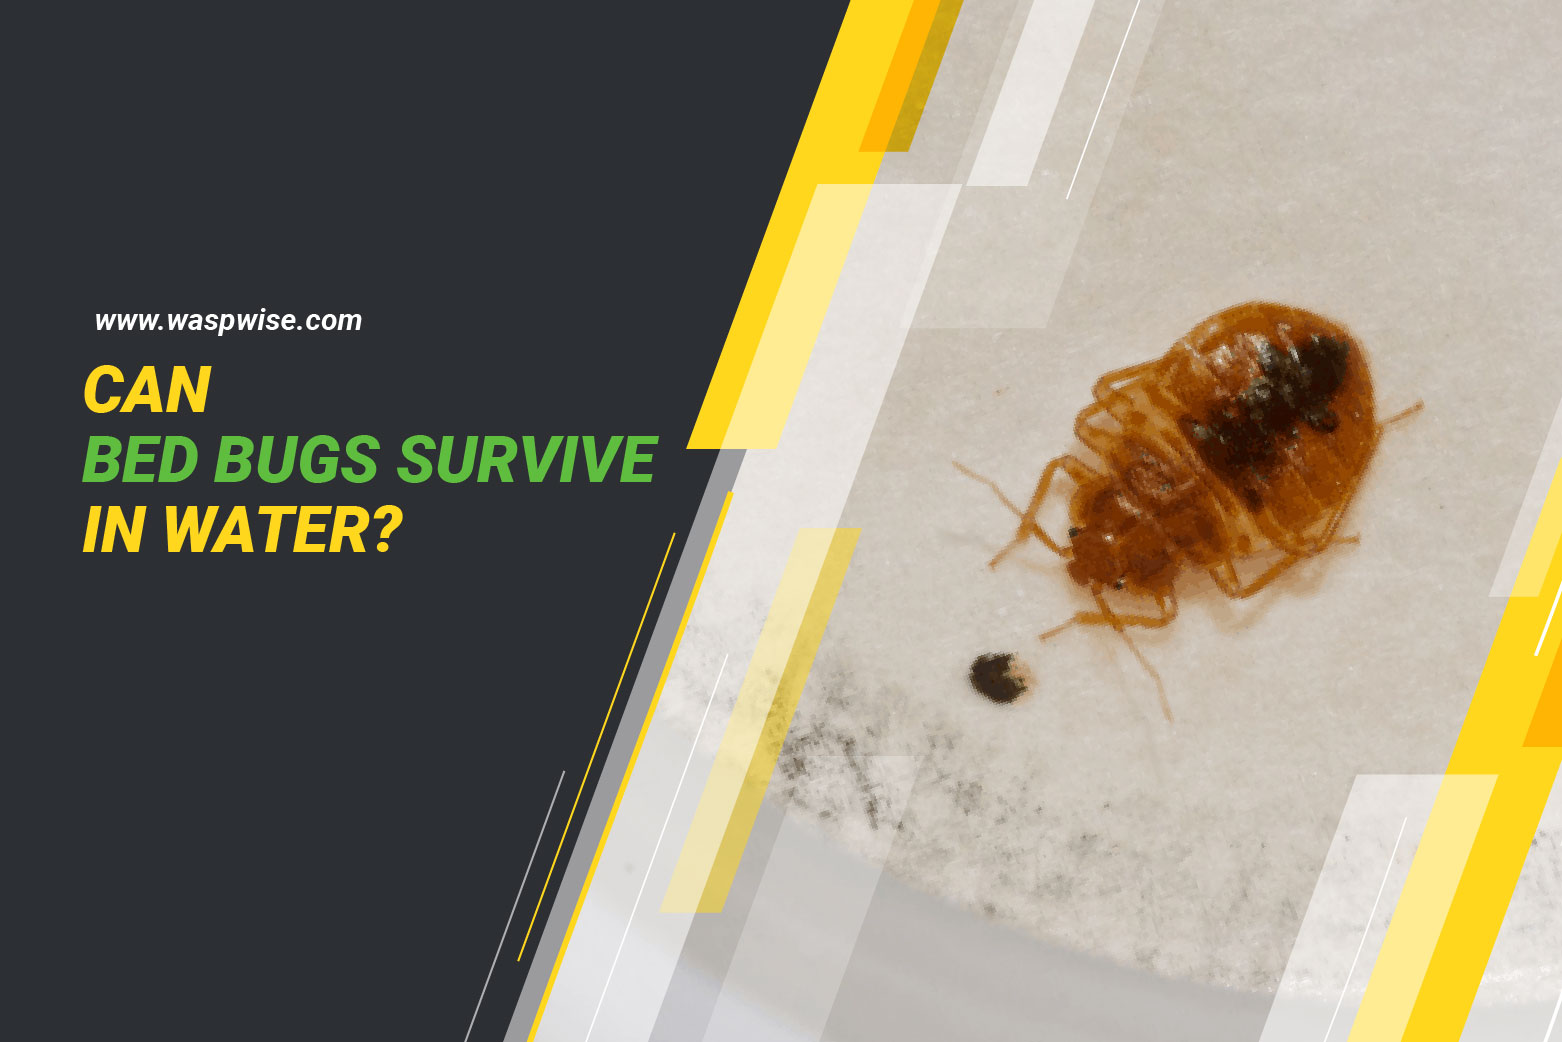 Can Bed Bugs Survive in Water